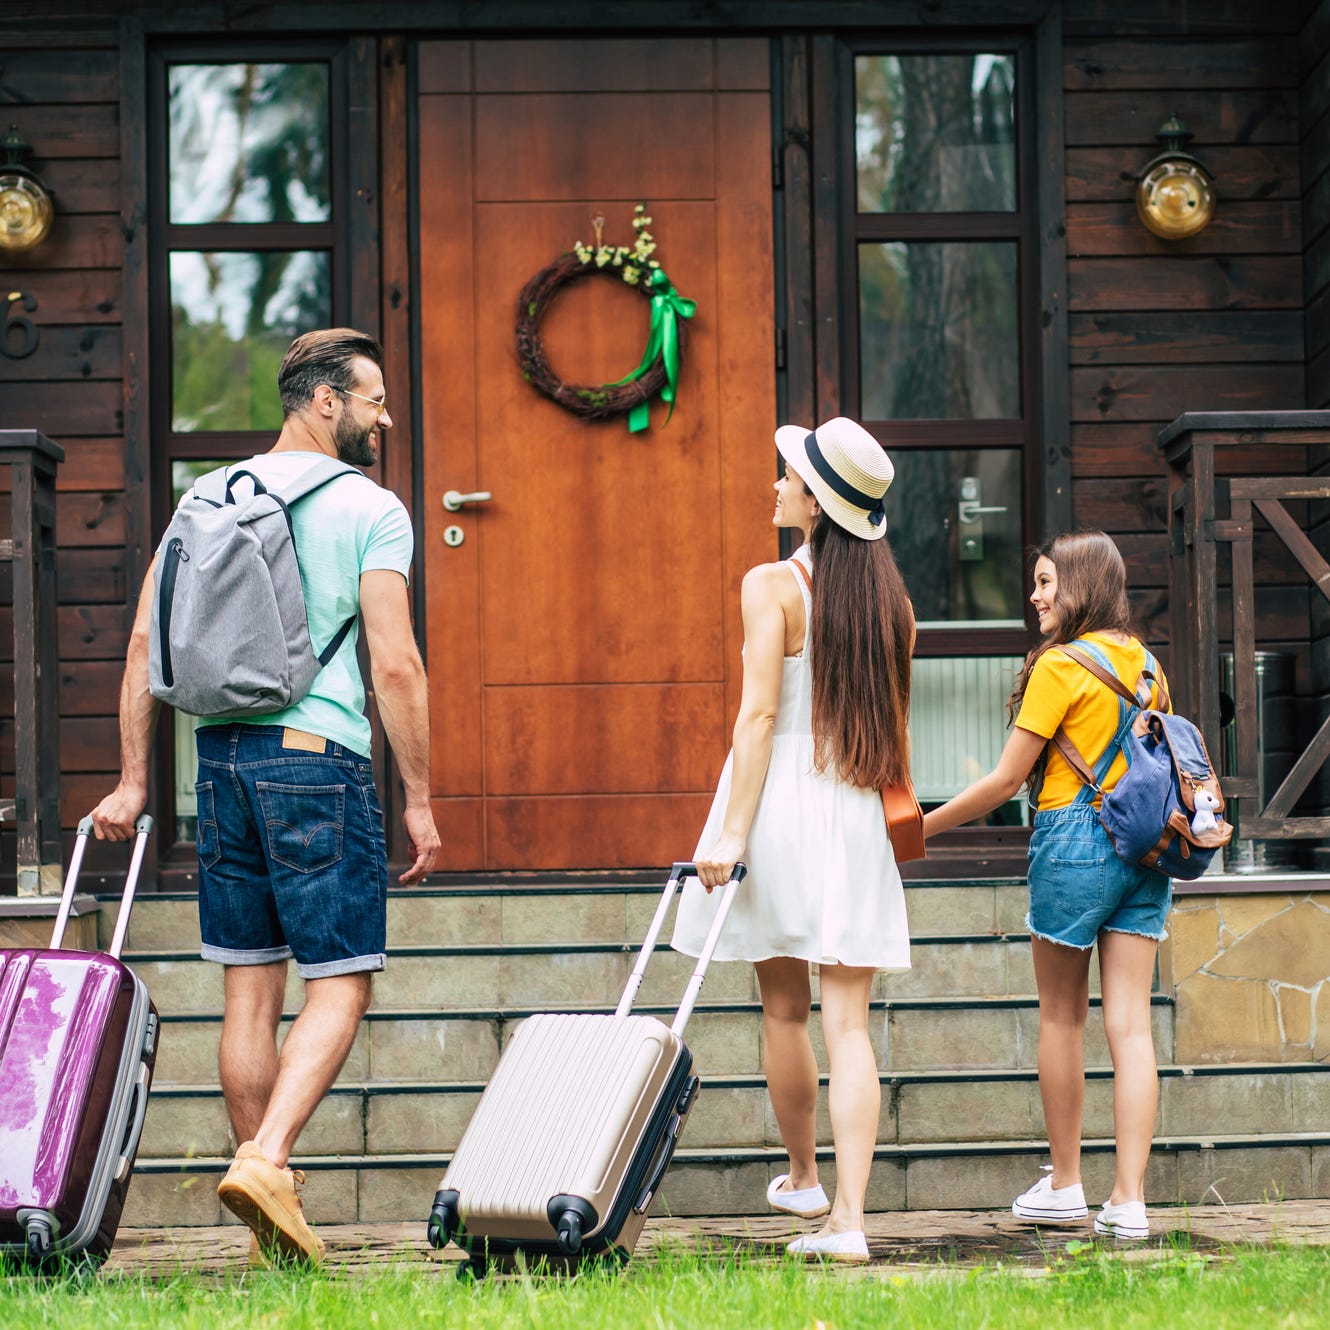 Families traveling with kids and/or grandparents may find it's more cost-efficient to rent a vacation home than put everyone up at a hotel.